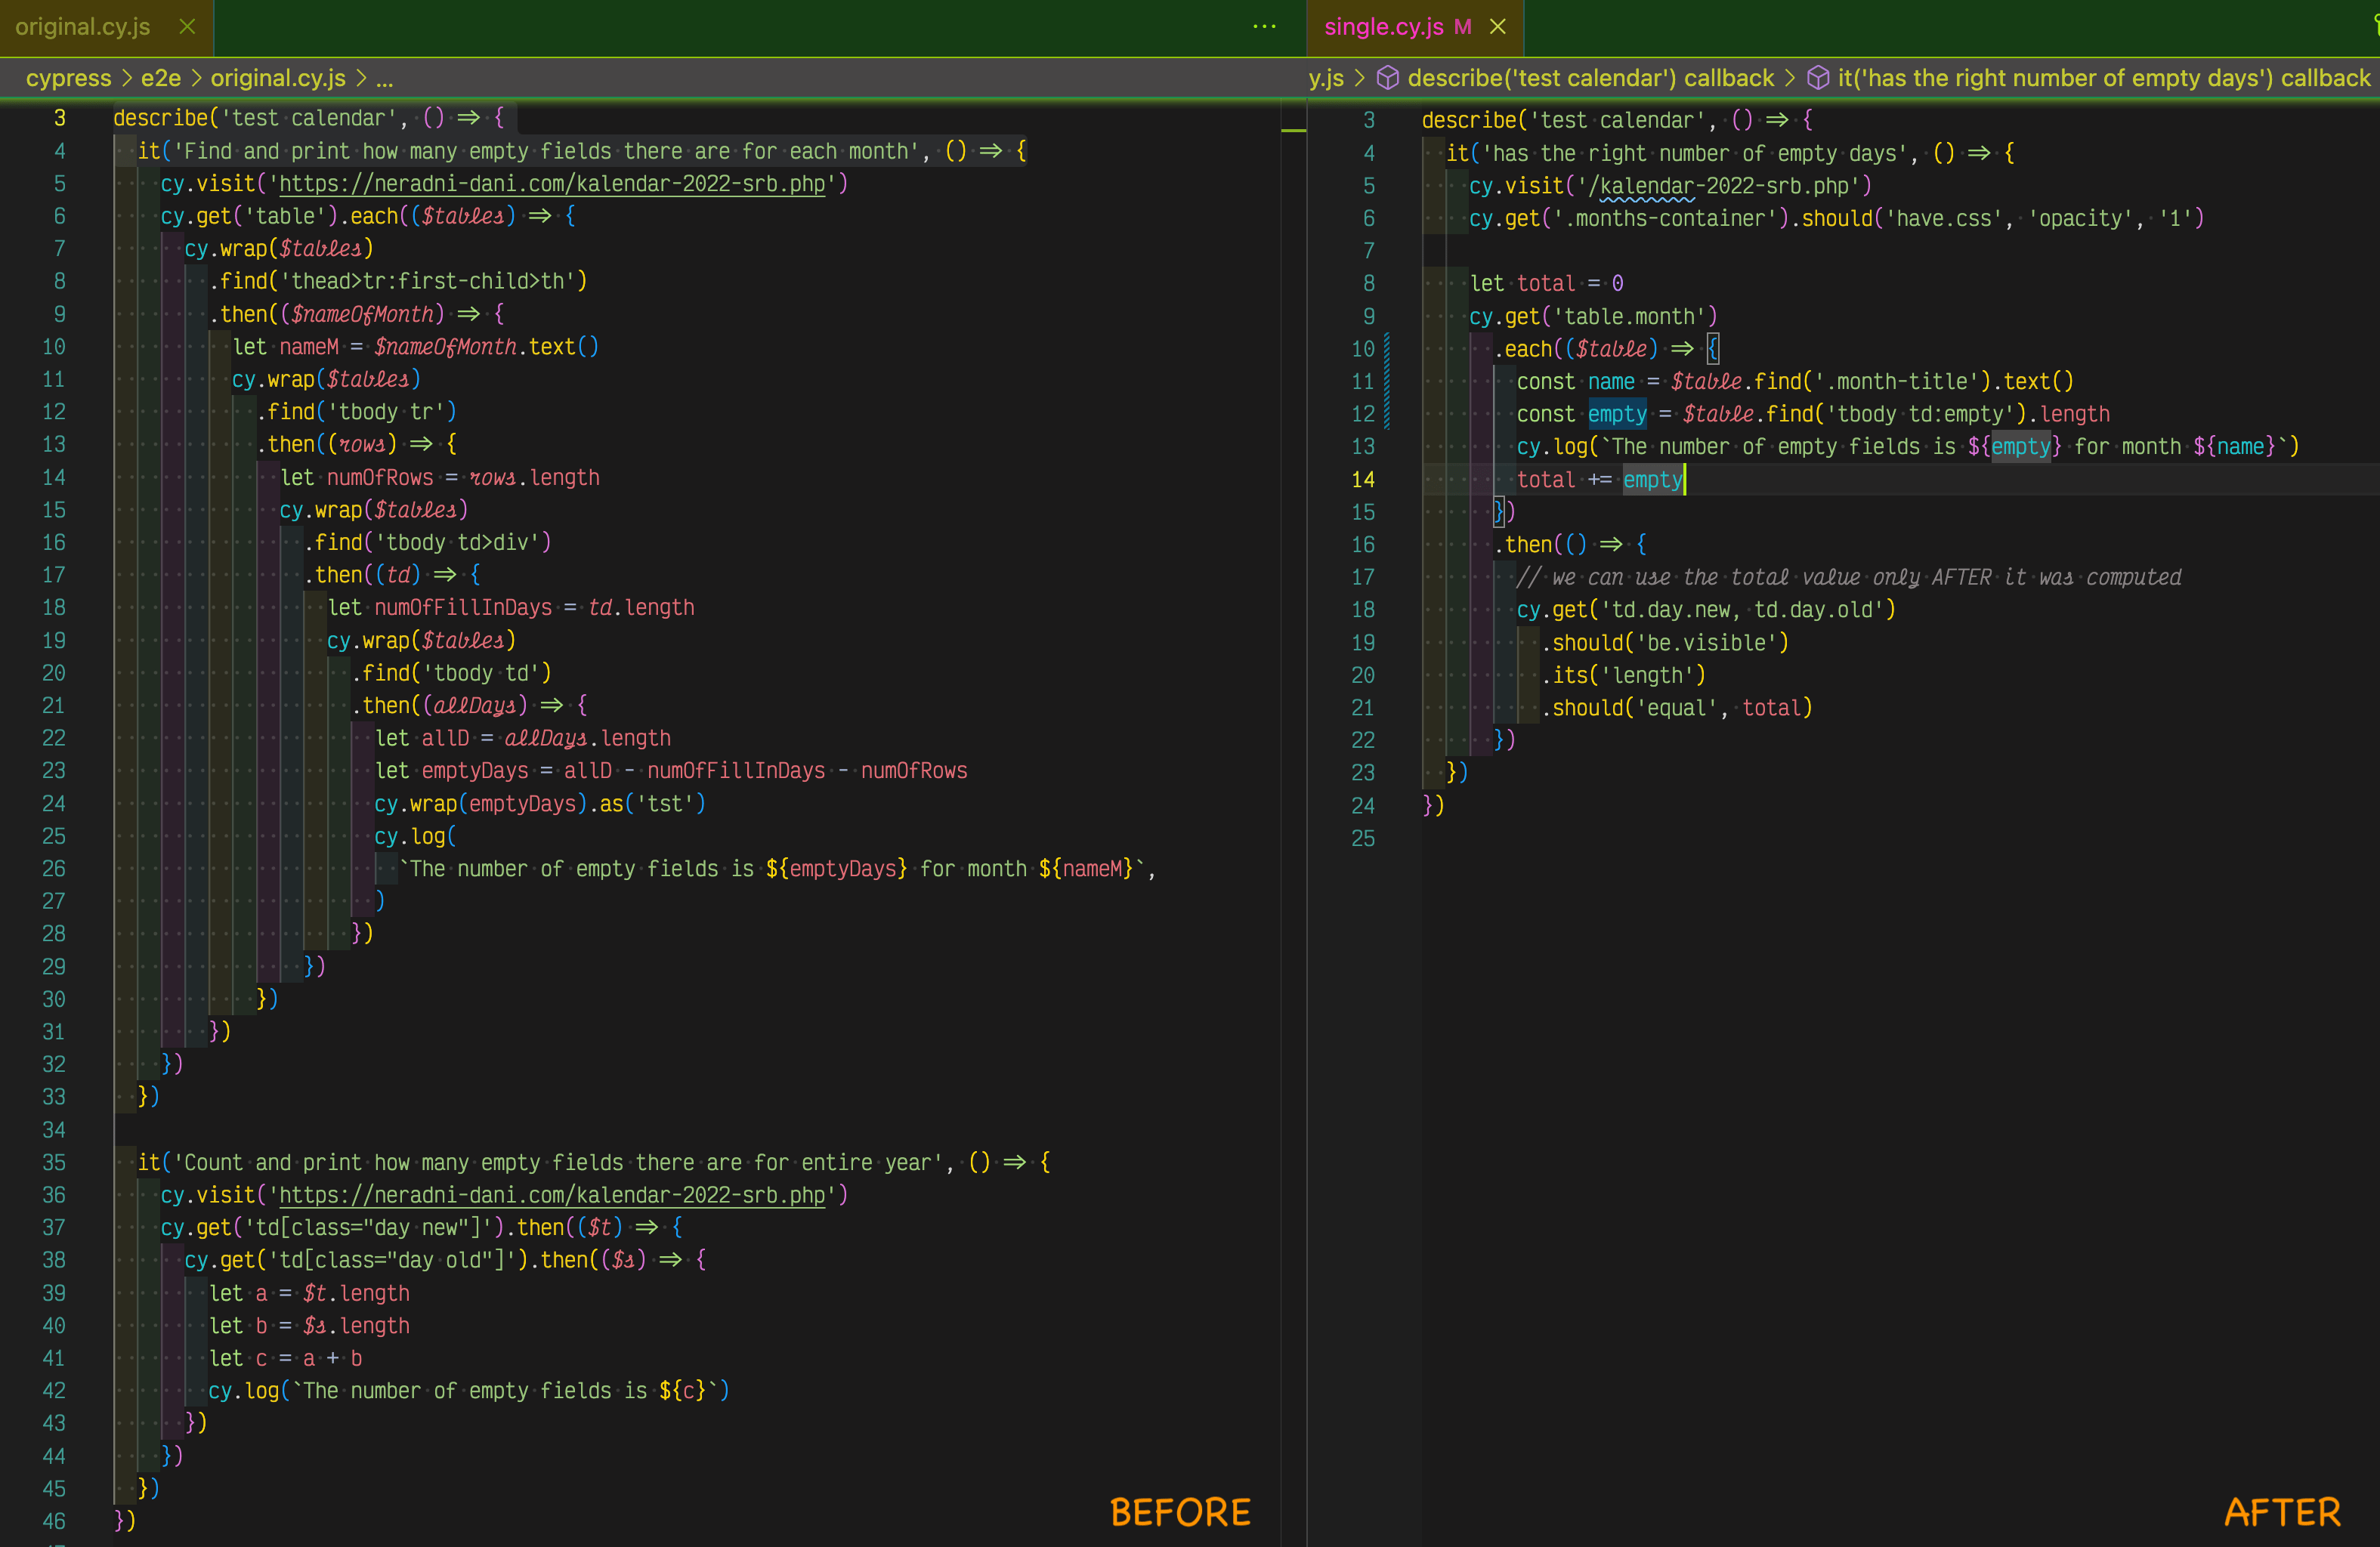 The code before and after rewriting